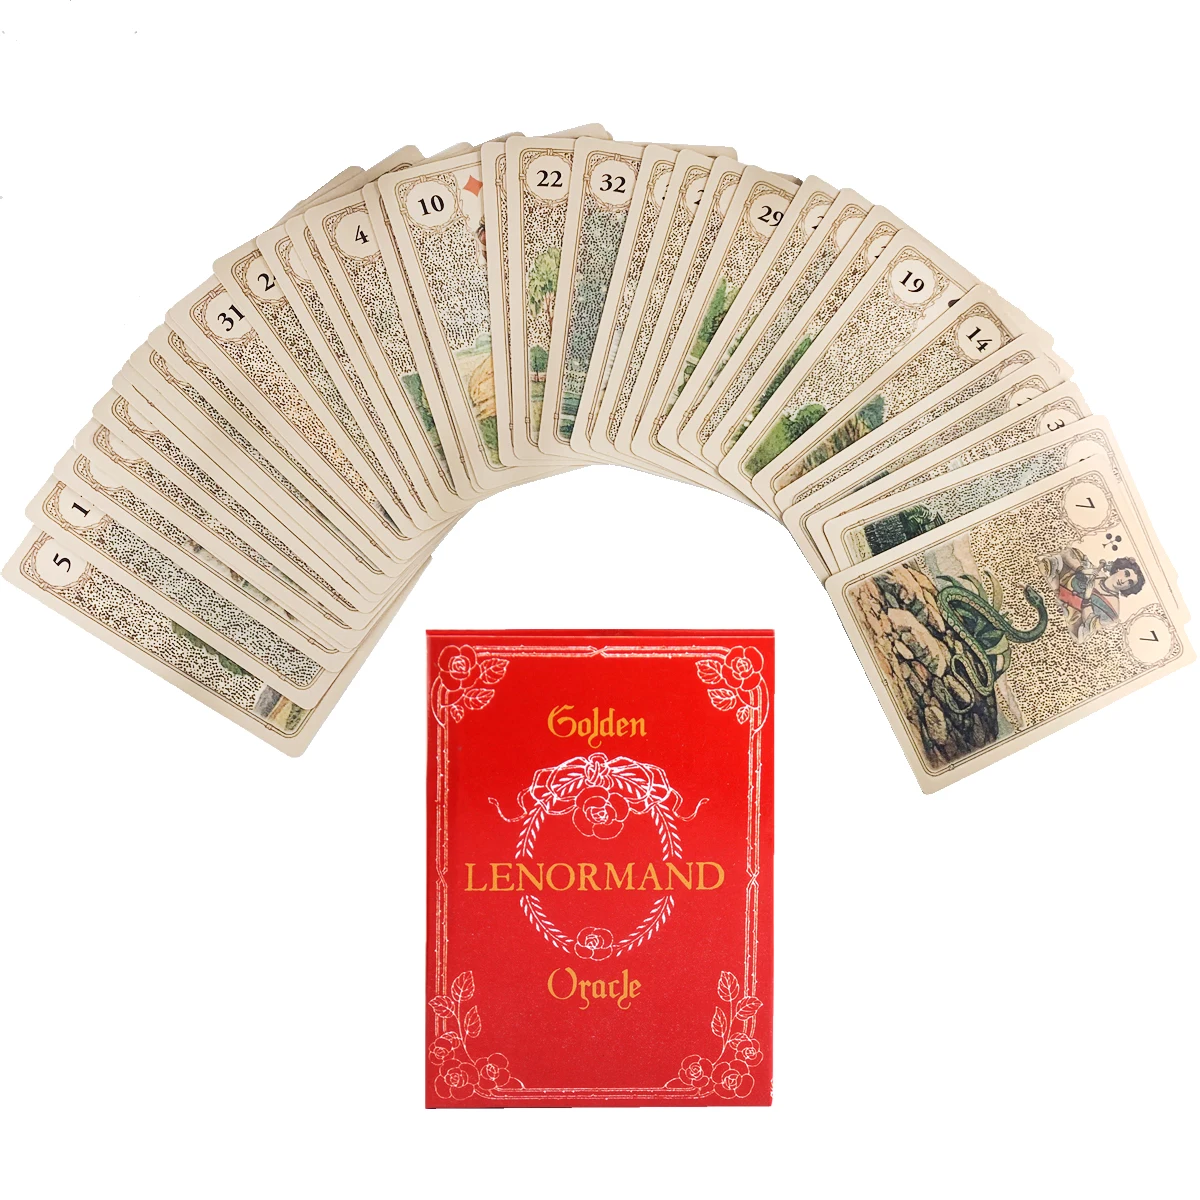 Golden Lenormand Oracle Cards Popular Tarot 9th-century Lenormand 36pcs Deck Leisure Party High Quality Fortune-telling Prophecy